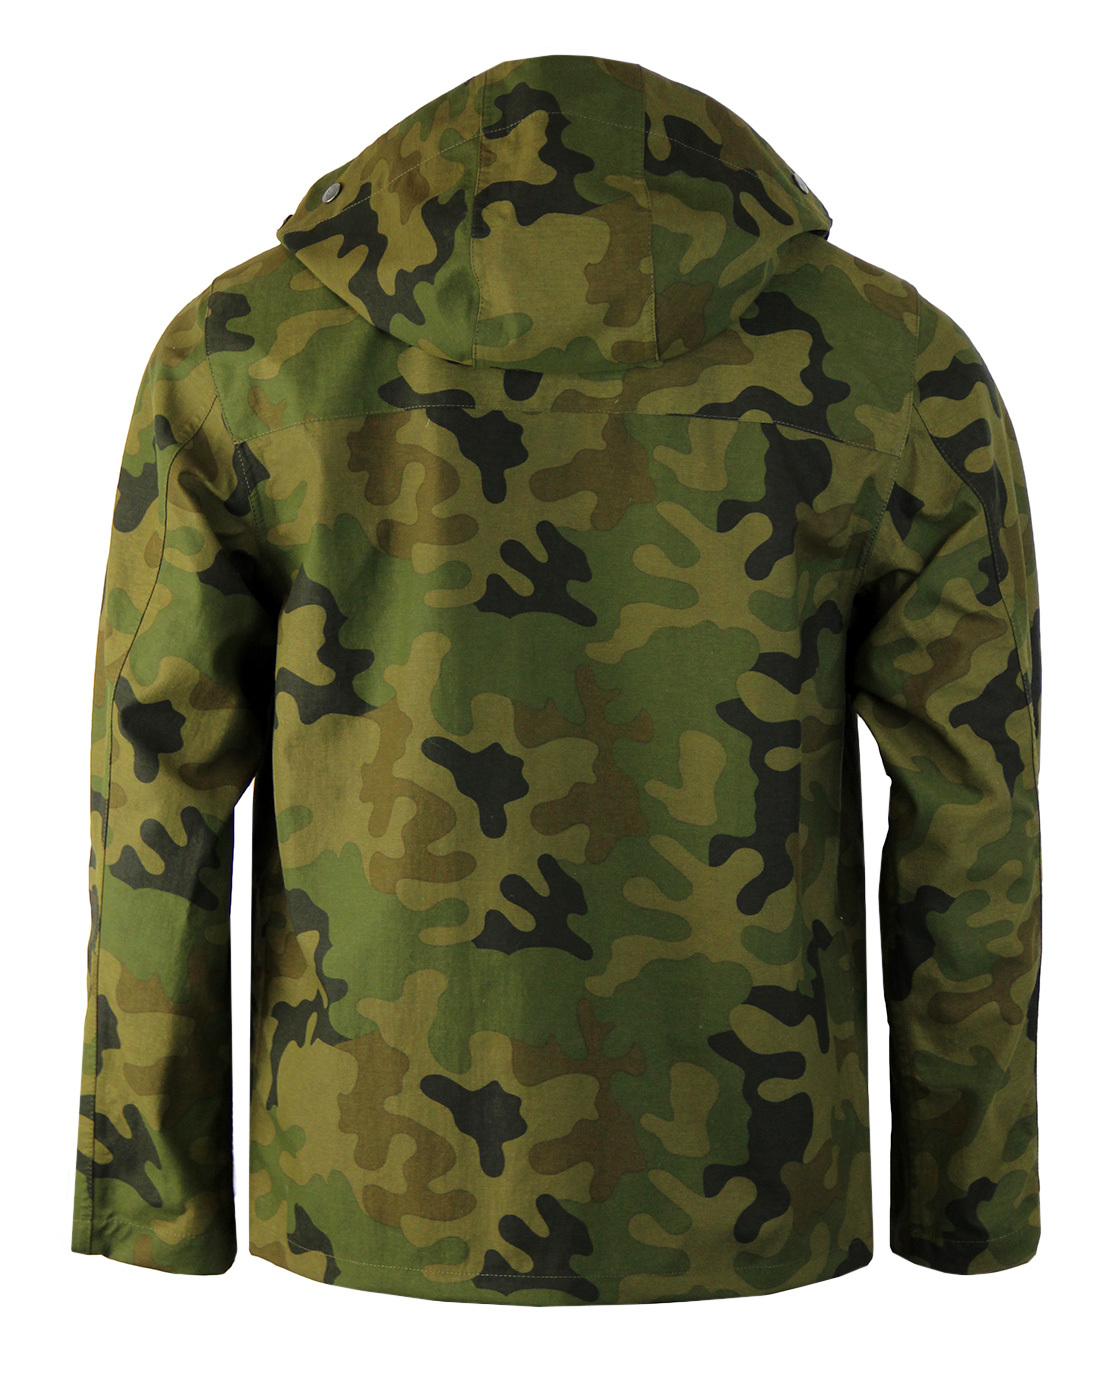 GLOVERALL Summer Monty Camo Retro Mod Duffle Coat in Camouflage